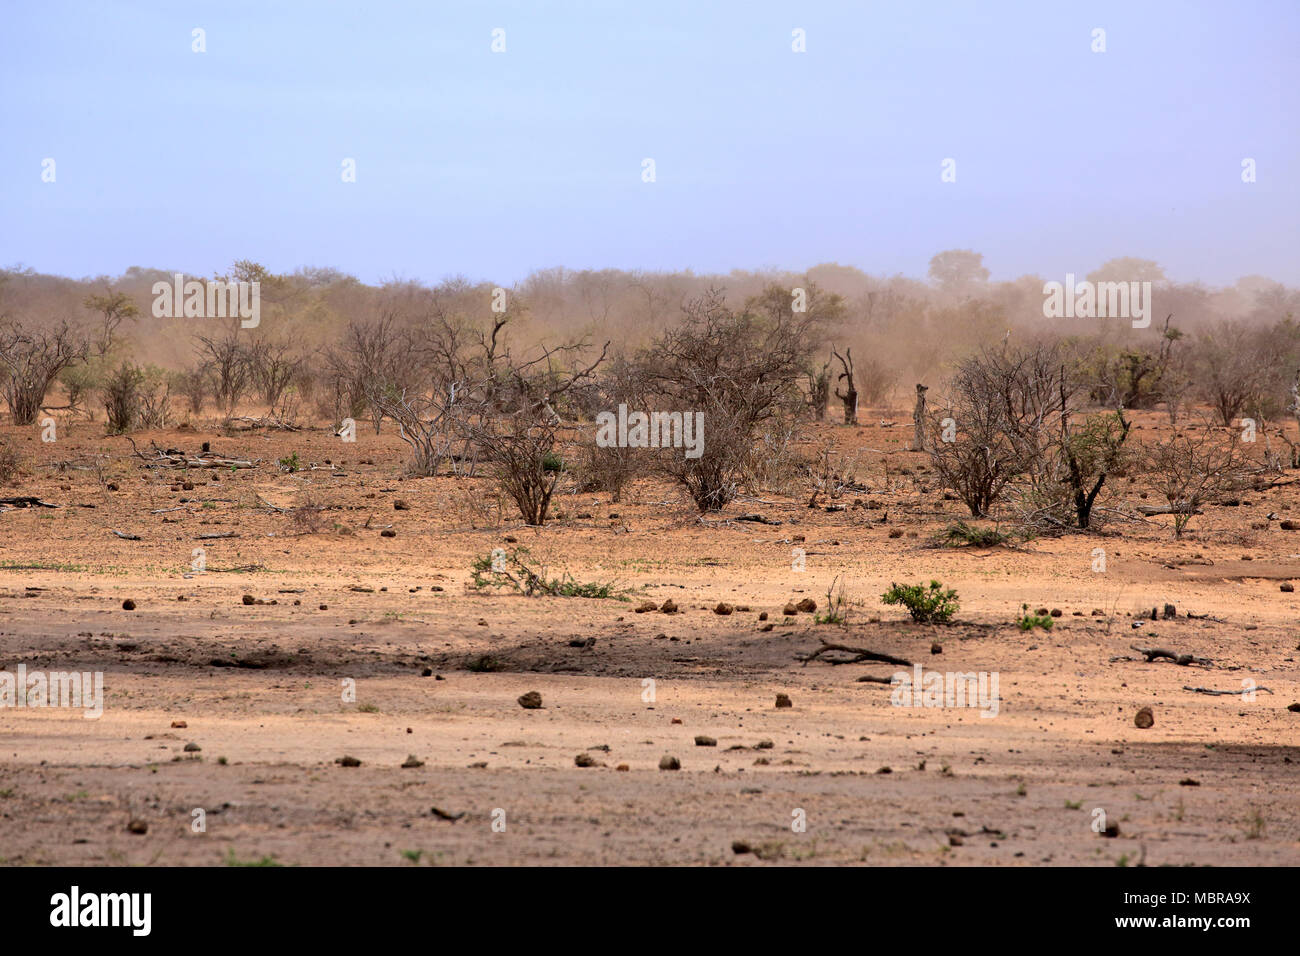 Dried Bushland, Drought, Kruger National Park, South Africa Stock Photo